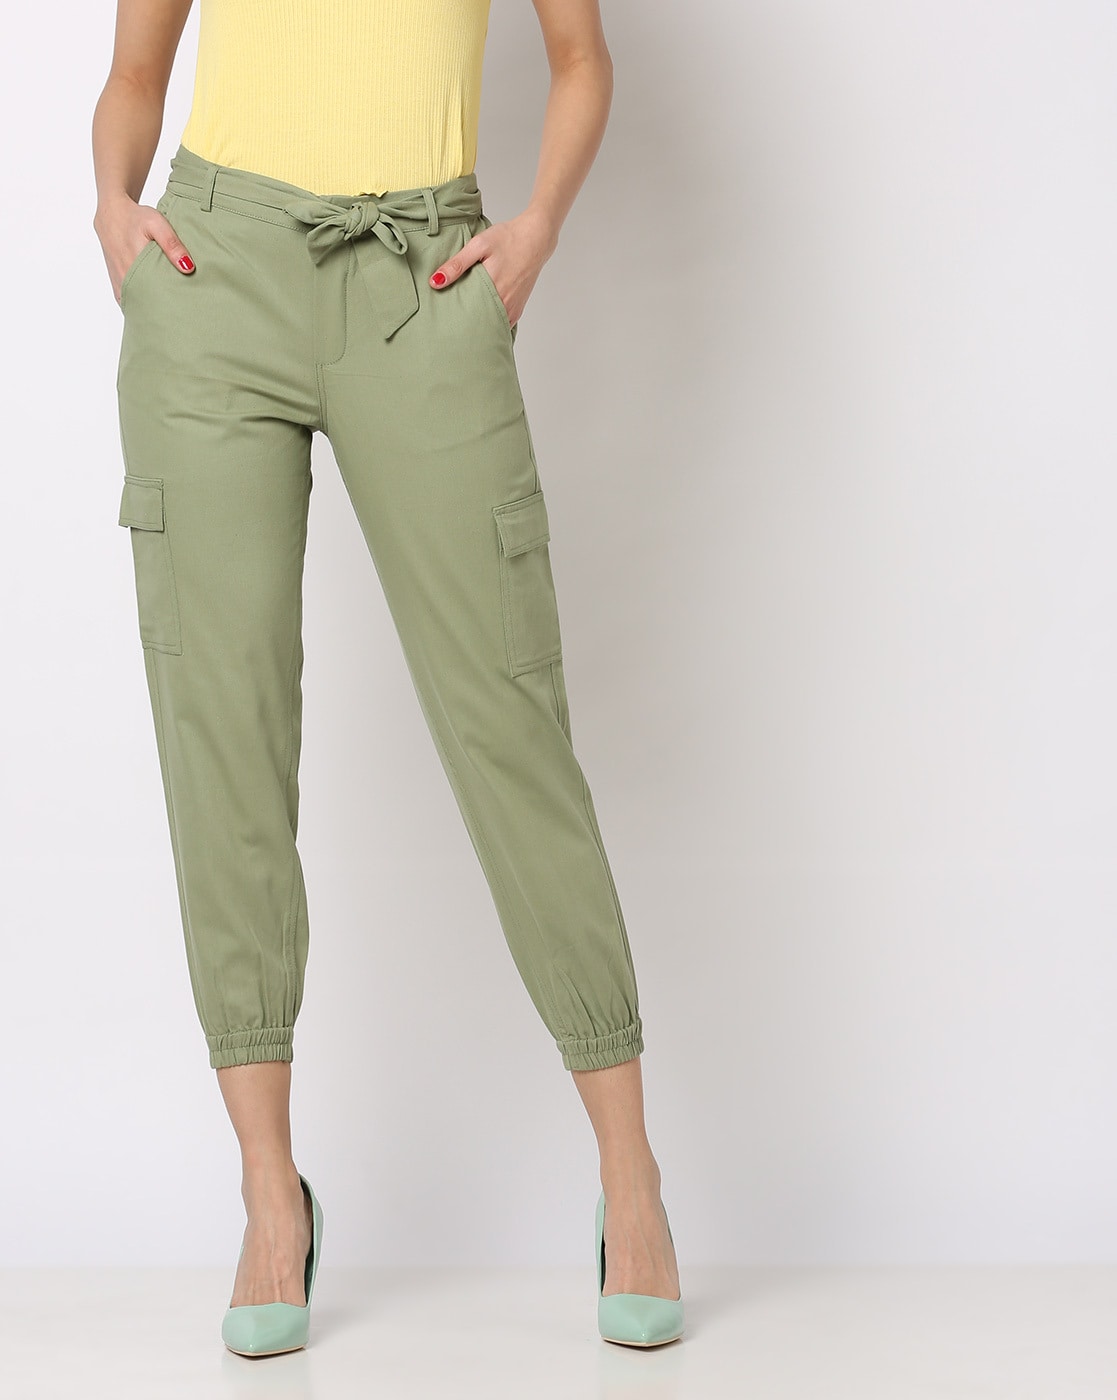 Khaki Cargo Pants with Floral Shirt Outfits 3 ideas  outfits  Lookastic